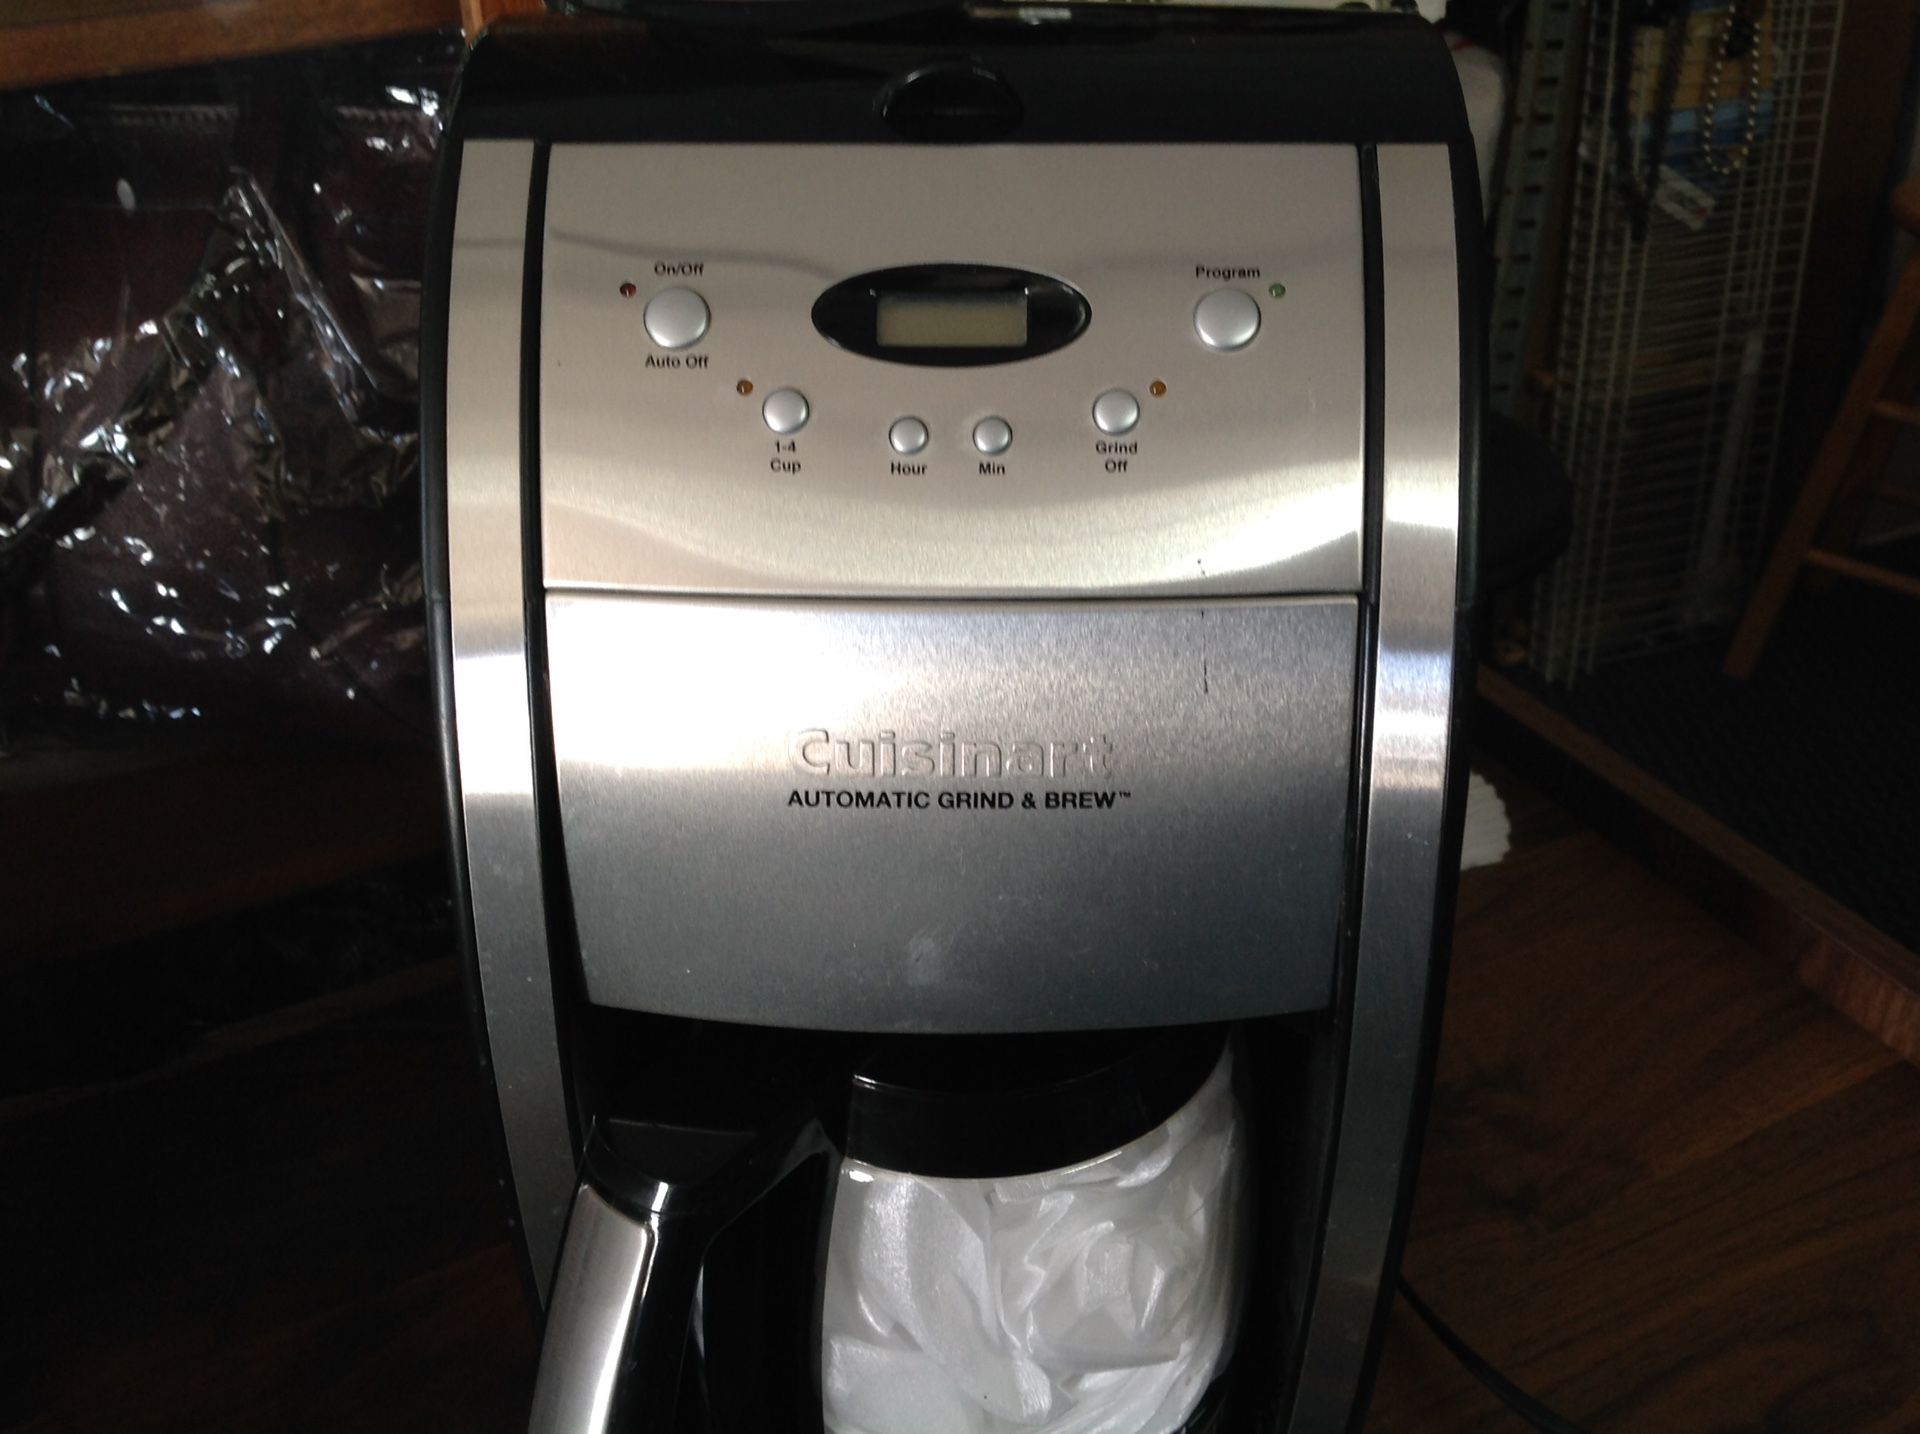 Cuisinart coffee maker Automatic grind & brew